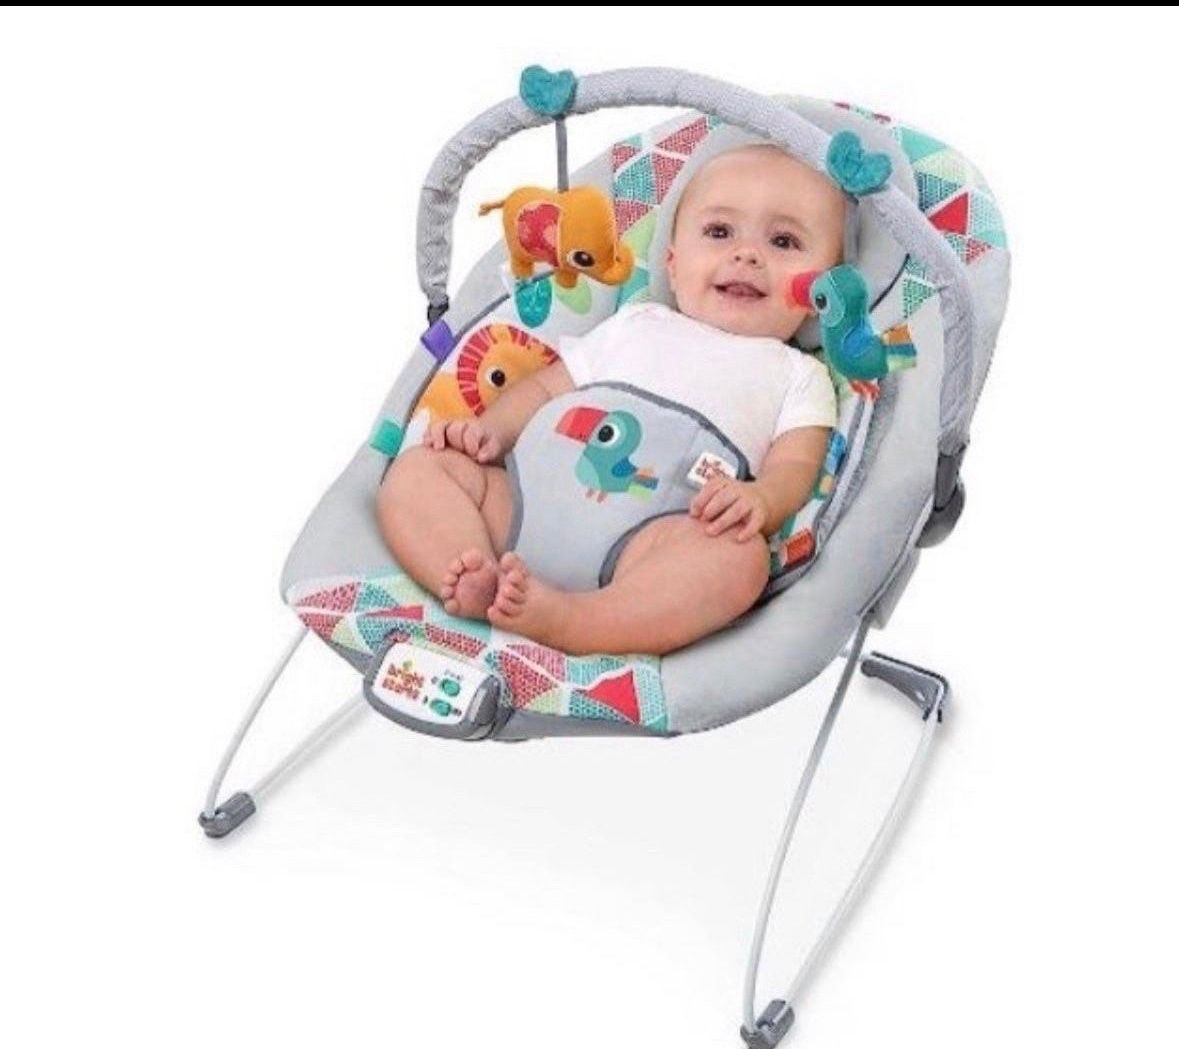 Bright Starts Baby Bouncer Soothing Vibrations Infant Seat - Taggies, Music, Removable-Toy Bar, 0-6 Months Up To 20 Lbs (Toucan Tango)  Box is damaged